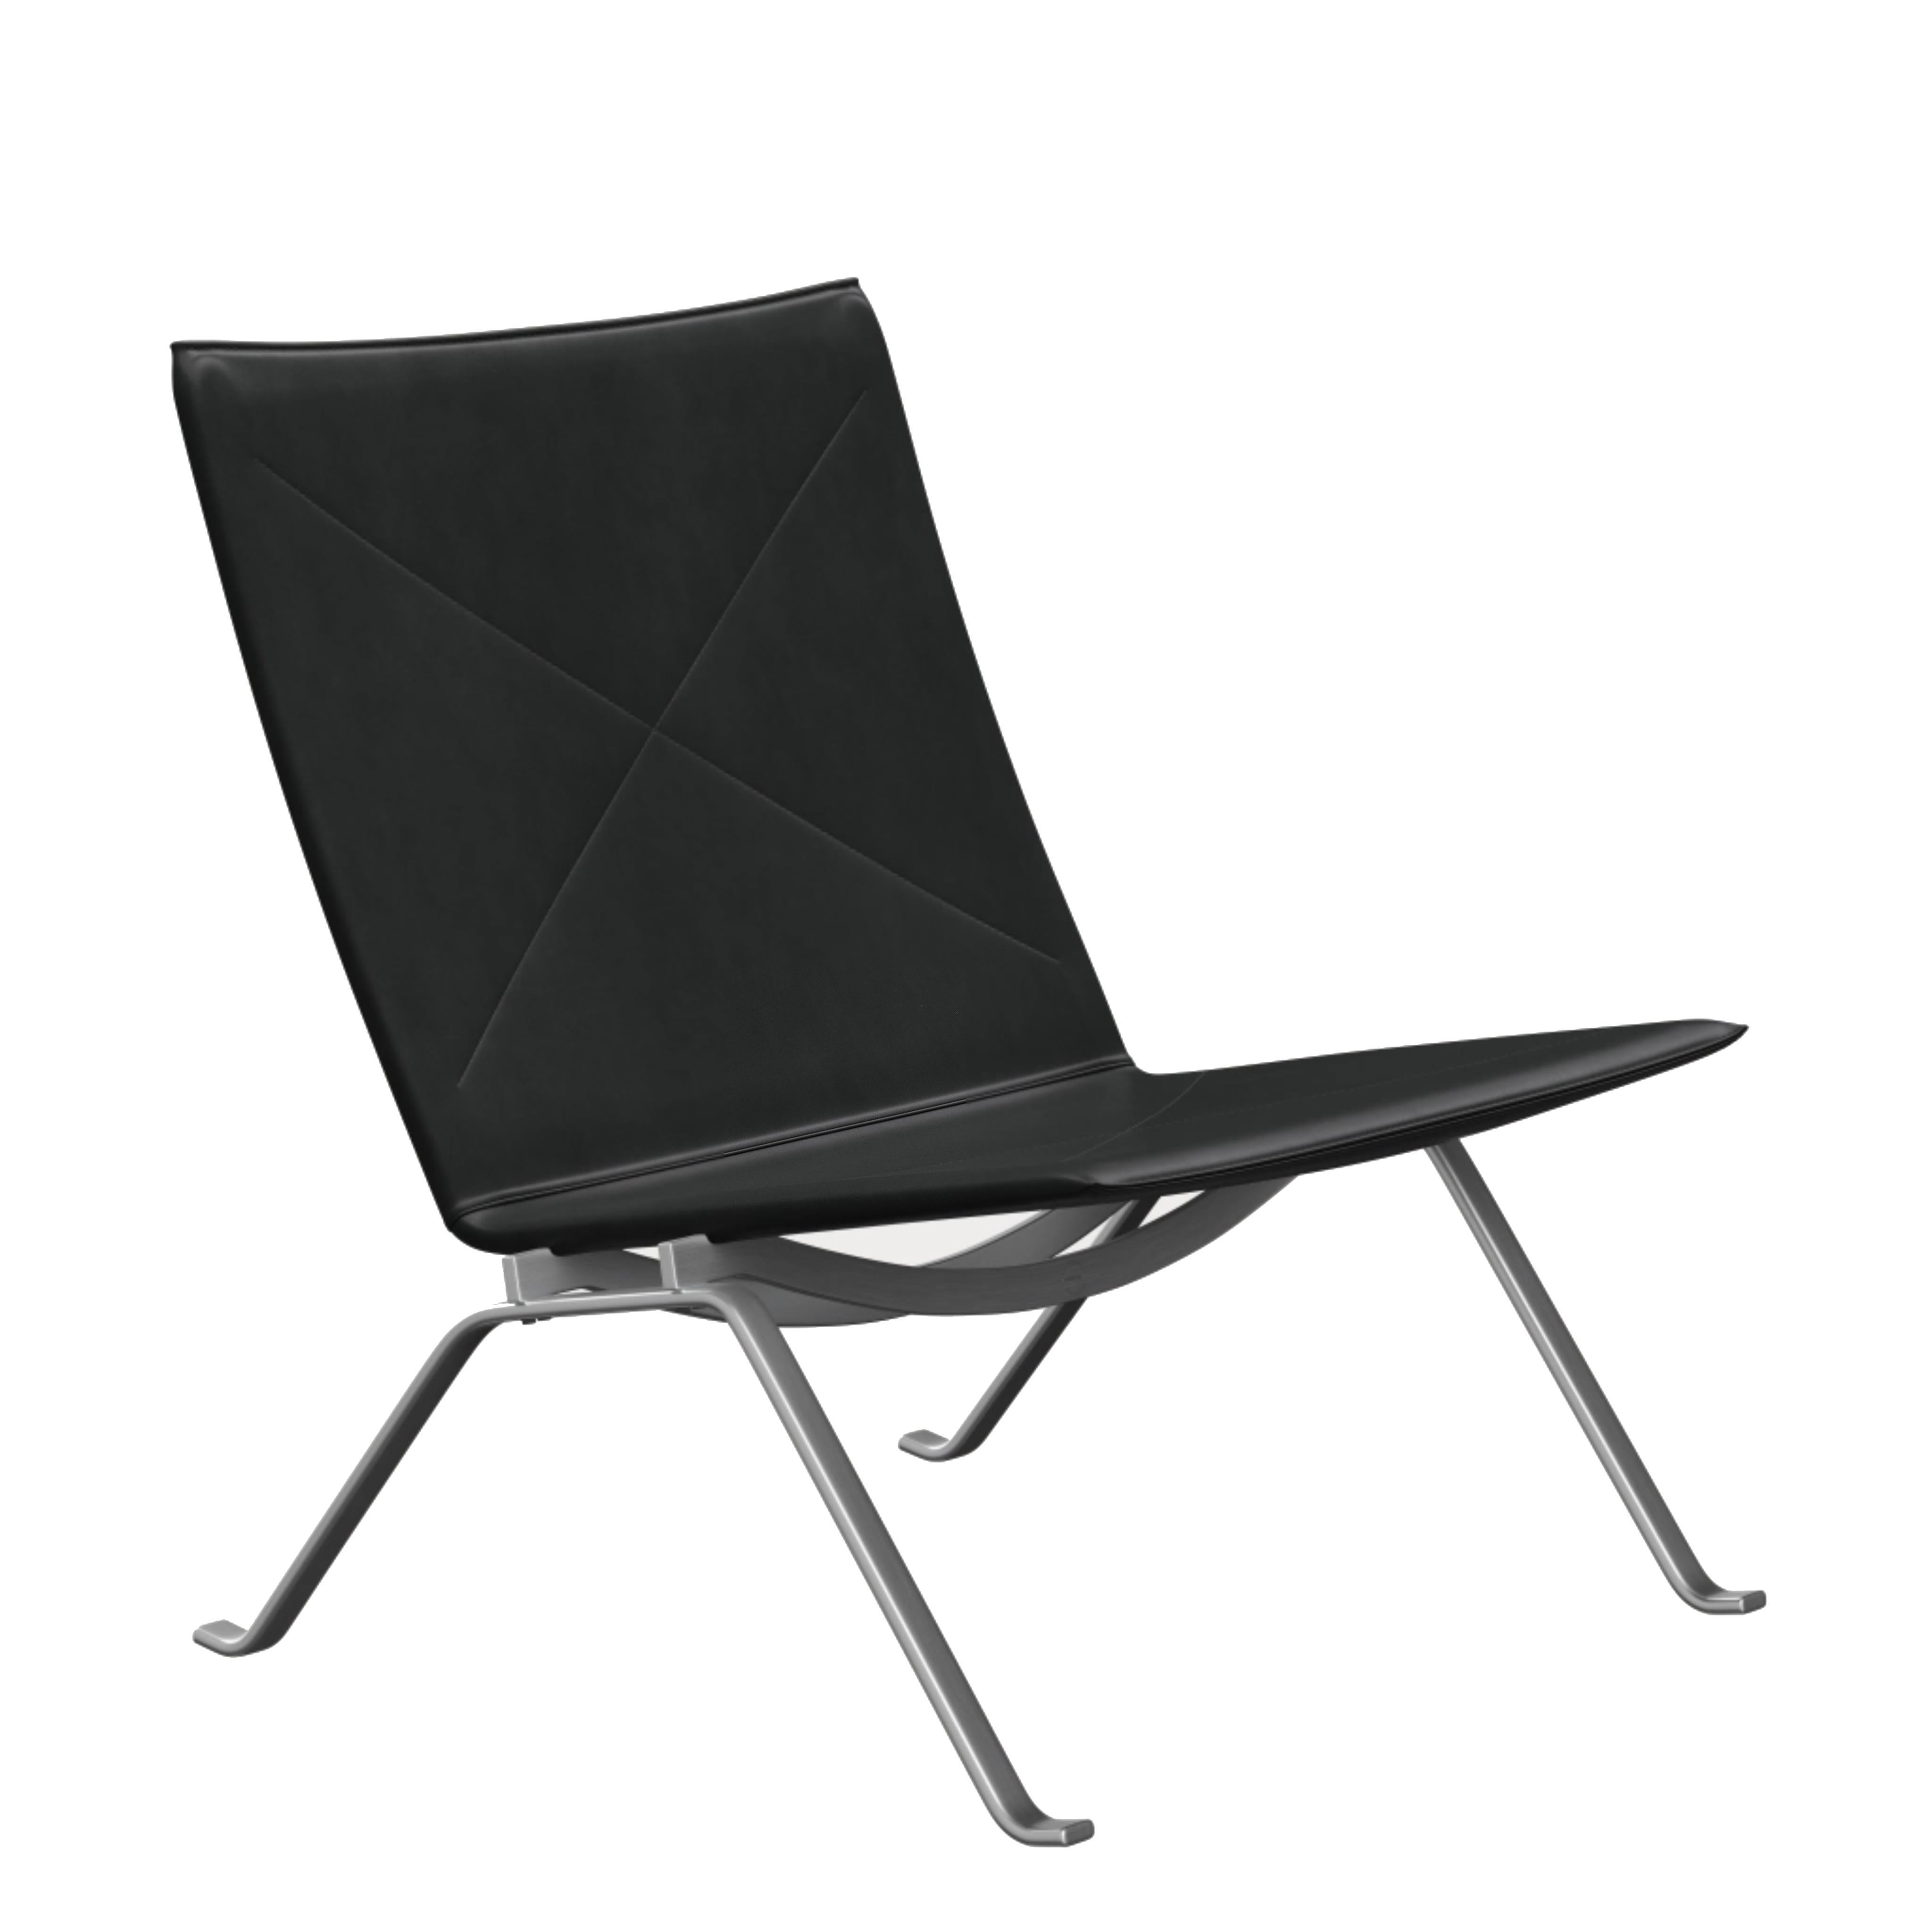 Poul Kjærholm 'PK22' Lounge Chair for Fritz Hansen in Leather (Cat. 5) For Sale 6